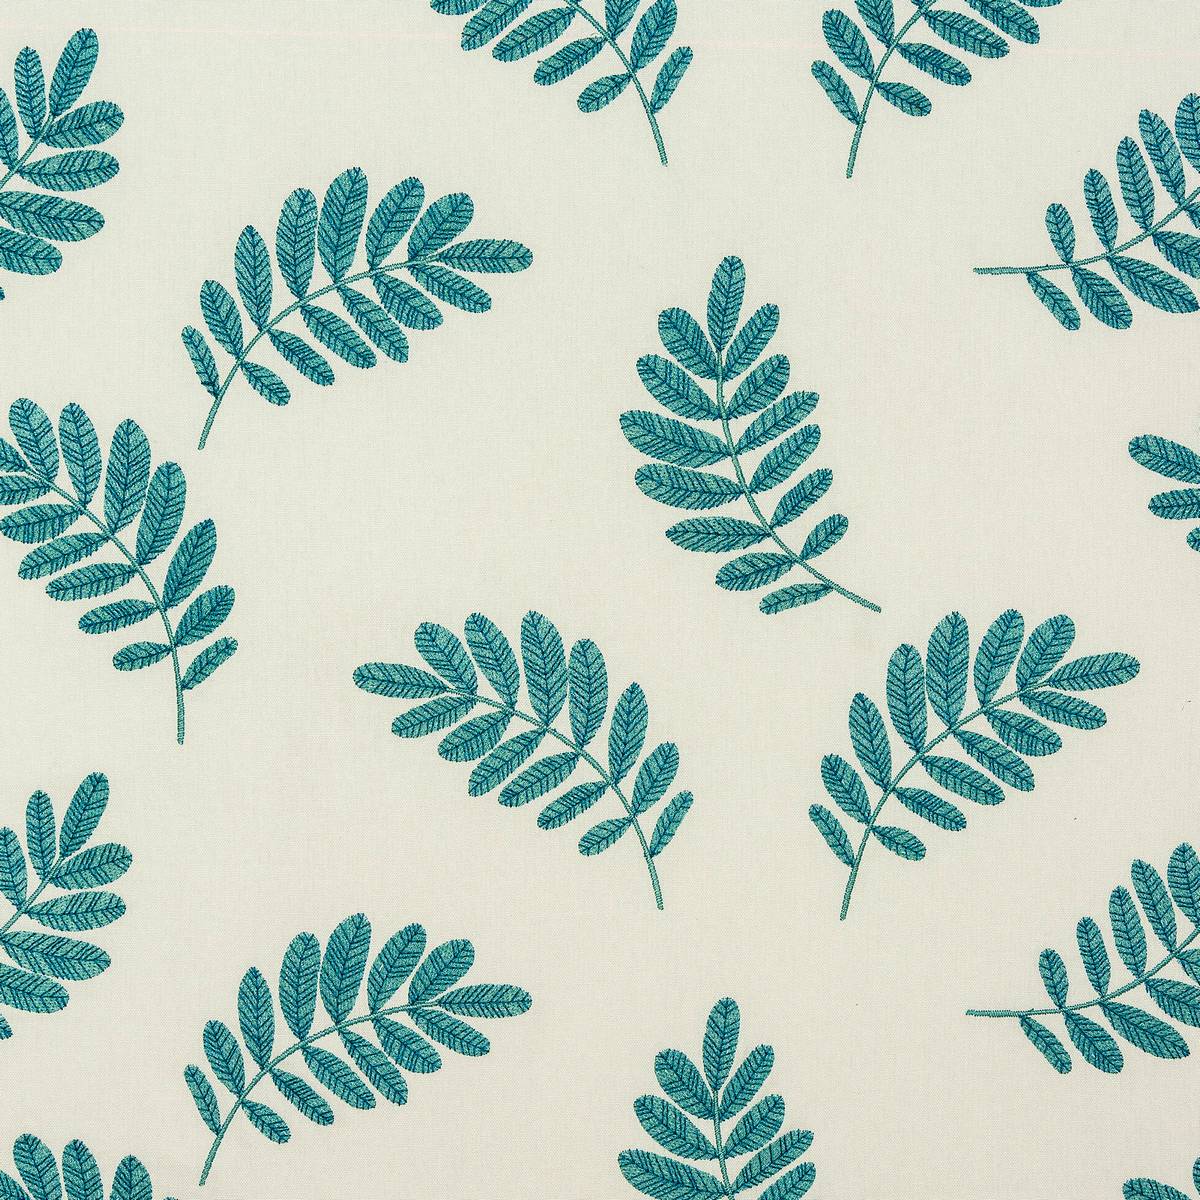 Trelissick Teal Fabric by Porter & Stone